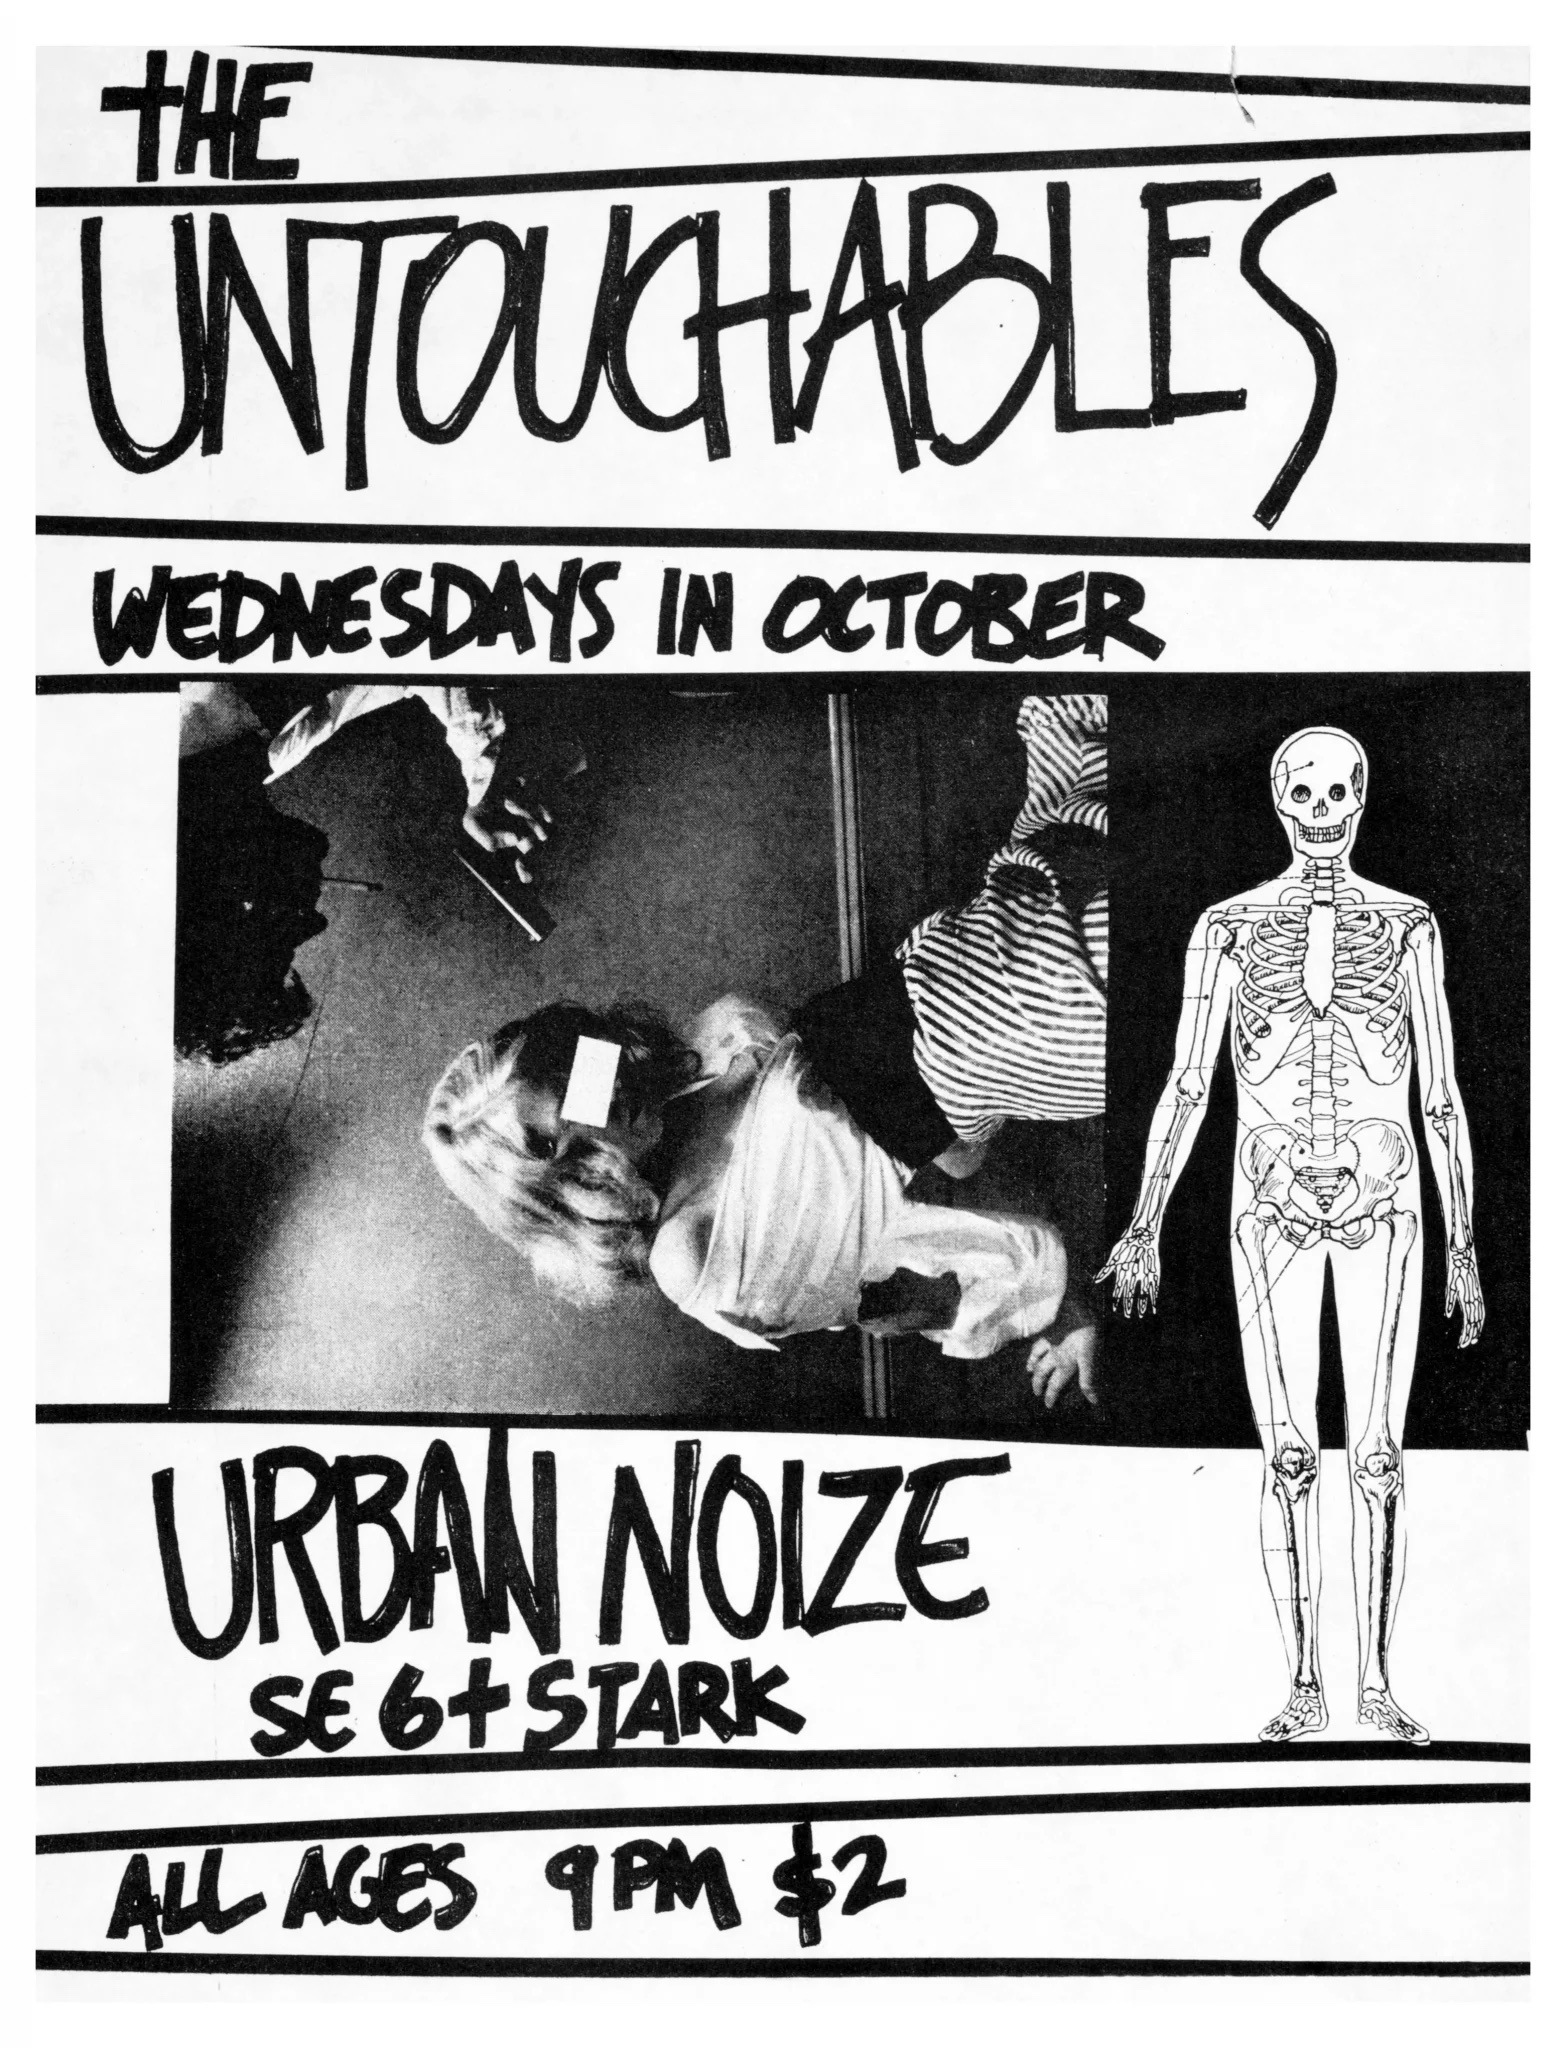 Poster for Untouchables at Urban Noise showing bound and blindfolded woman and diagram of figure showing internal organs